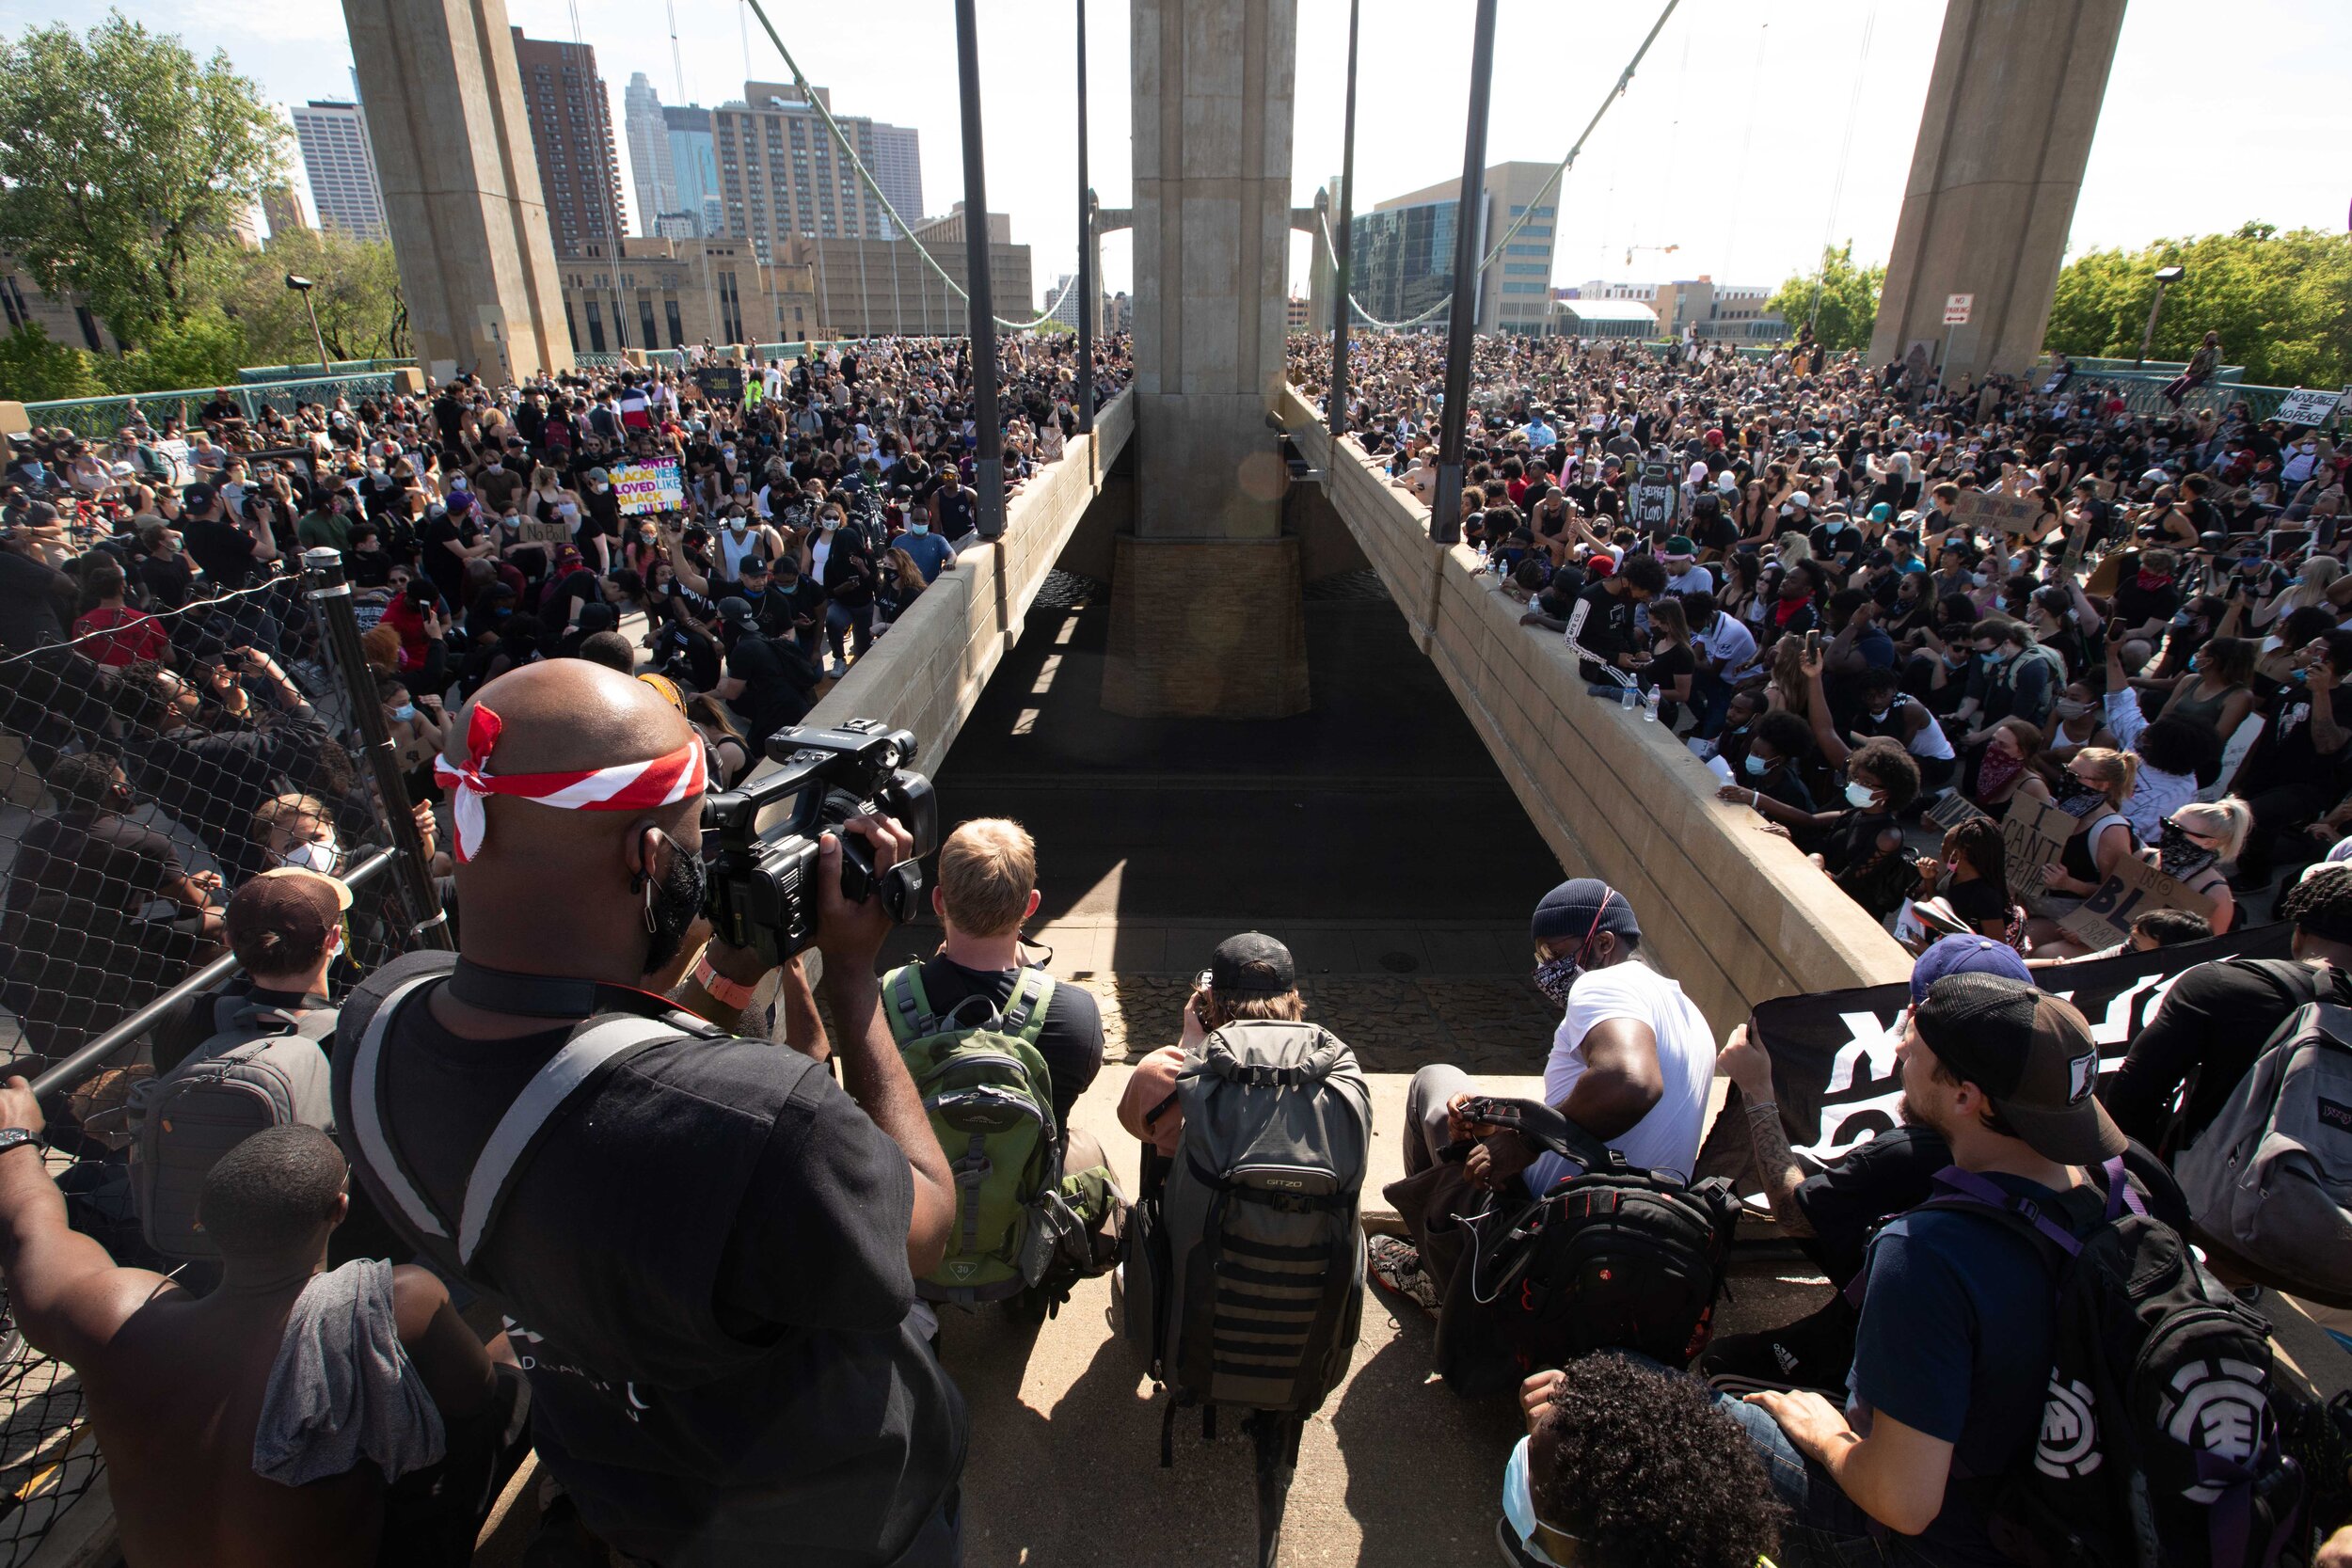  Over 20,000 protesters sat down in protest over the police killing of George Floyd on the Washington Ave bridge in Minneapolis on May 31. 